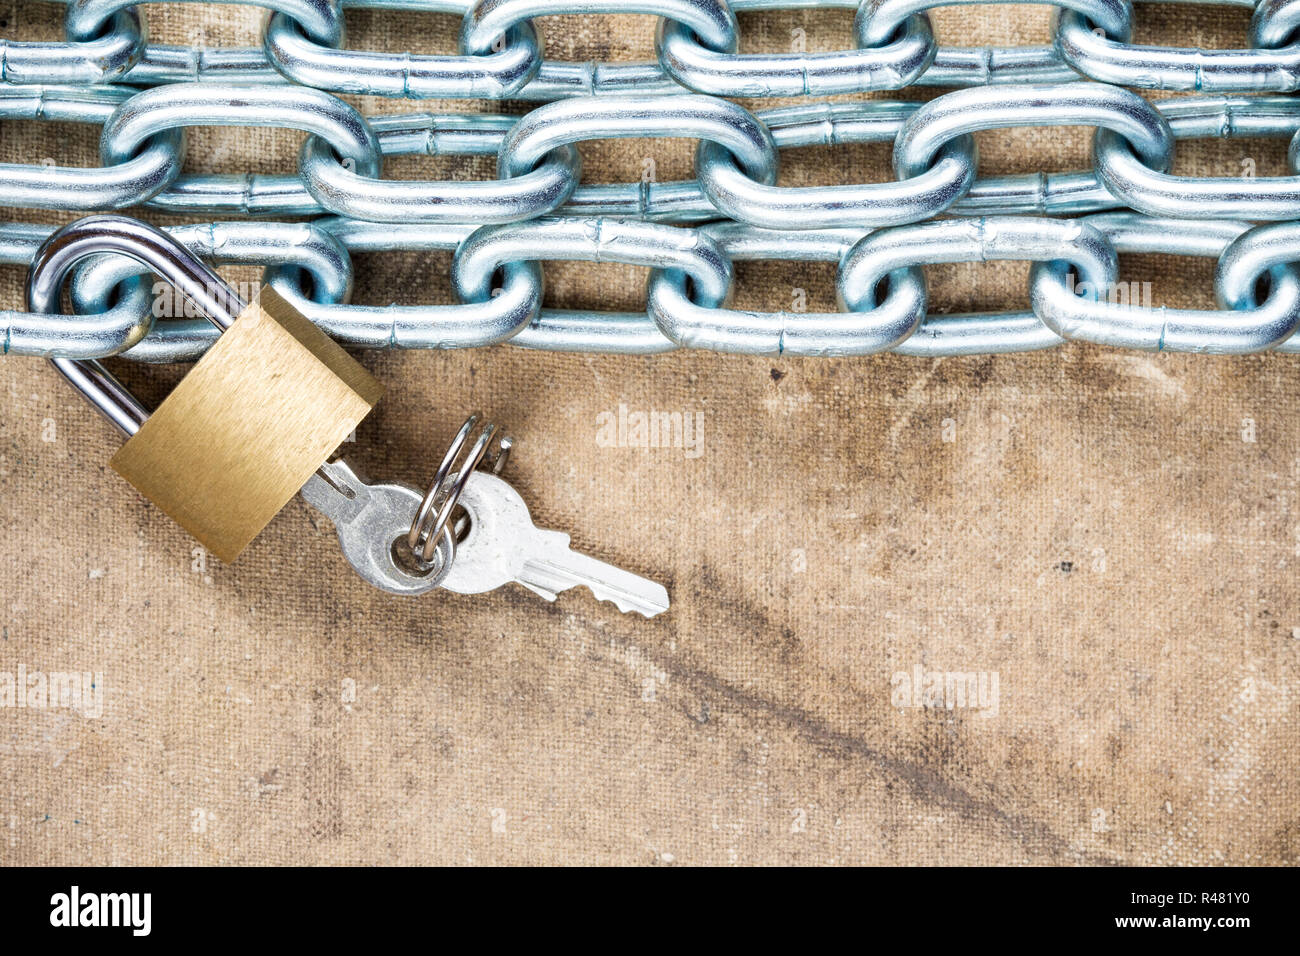 Padlock and chain on the dirty background Stock Photo